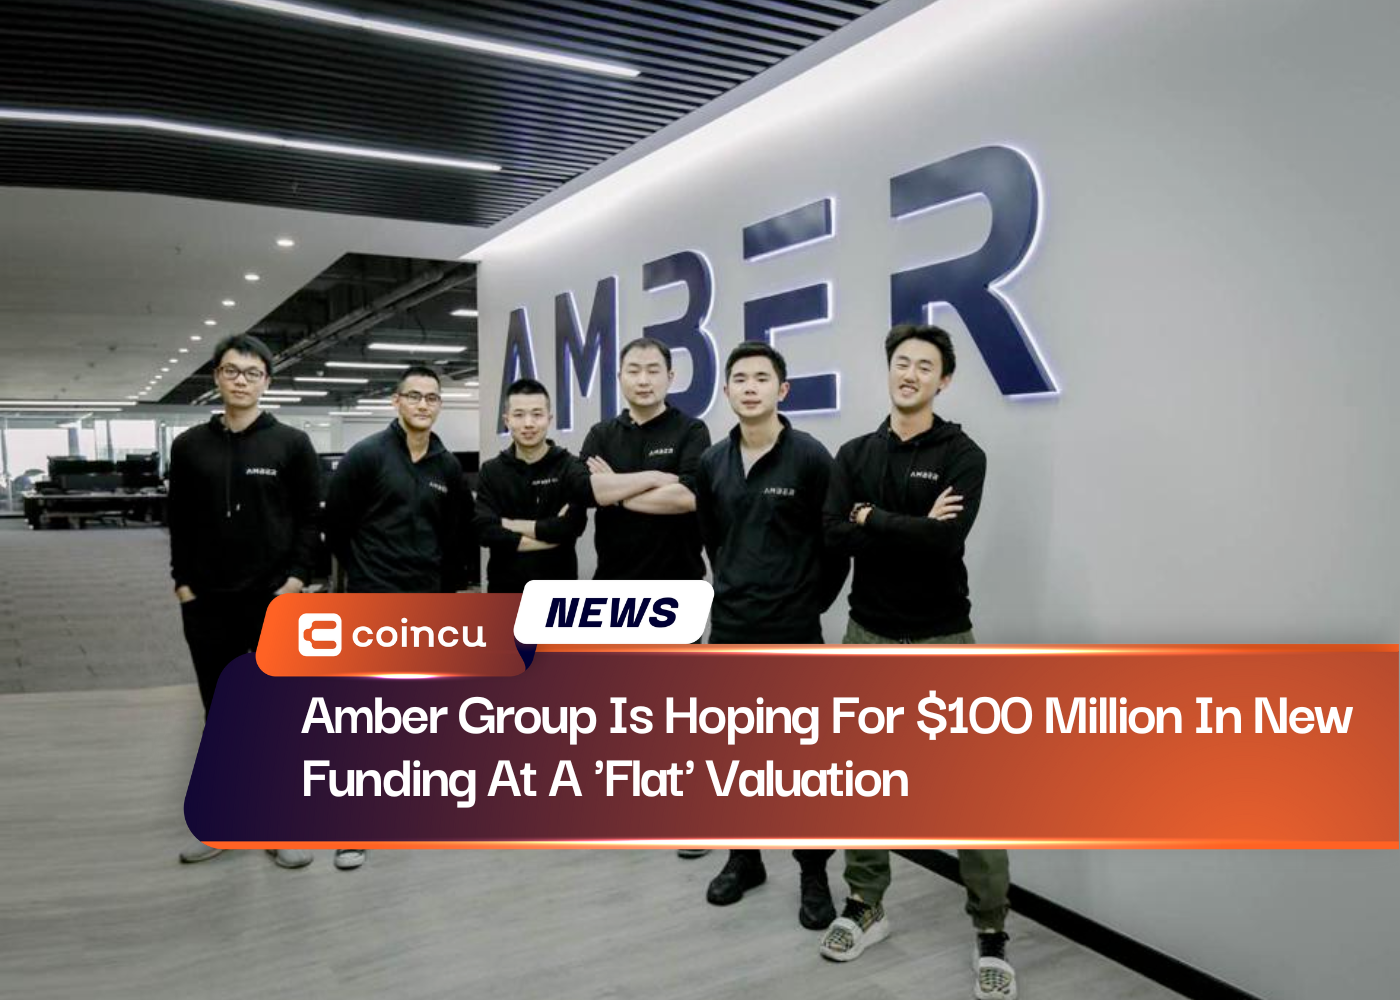 Amber Group Is Hoping For $100 Million In New Funding At A 'Flat' Valuation